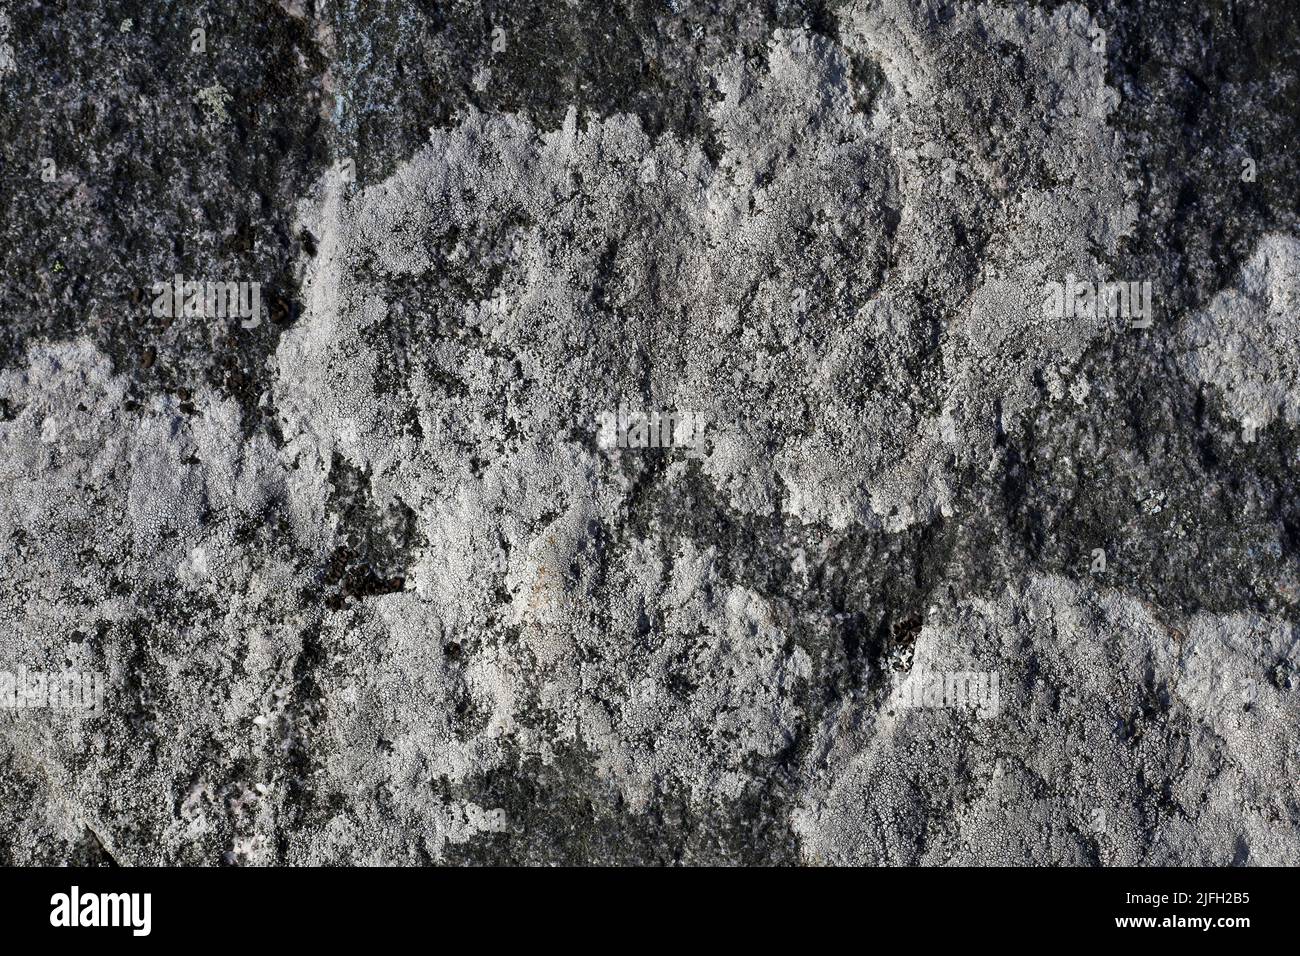 Grey lichen on a surface of dark grey rock. Photographed in Finland. Closeup image of the beautiful texture created by nature. Stock Photo